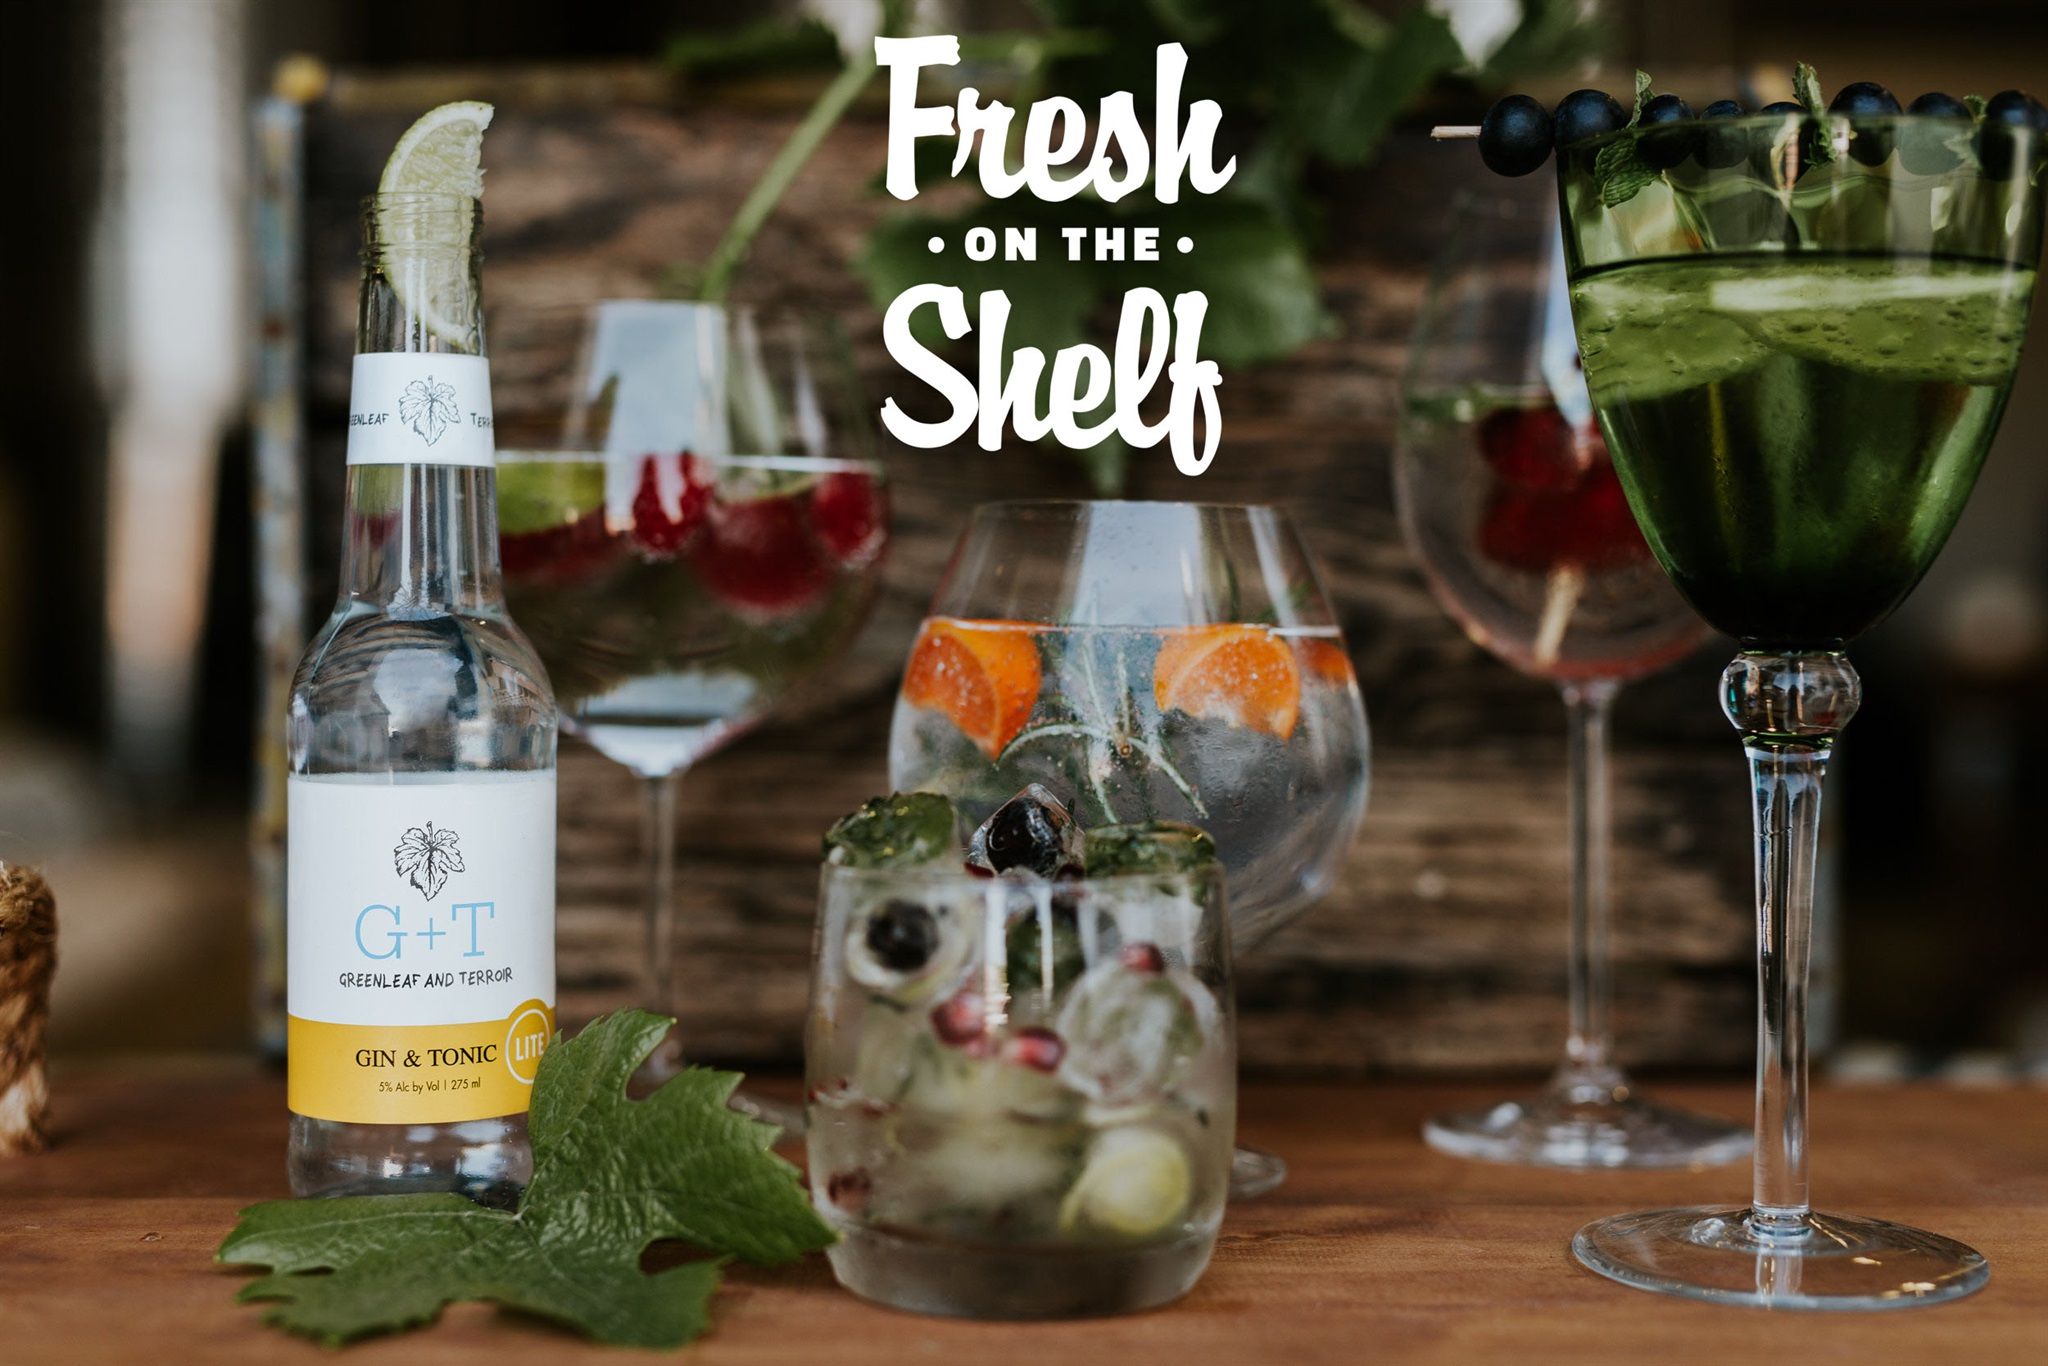 #freshontheshelf: New G+t Premix Distilled With The Flavour Of The Cape photo